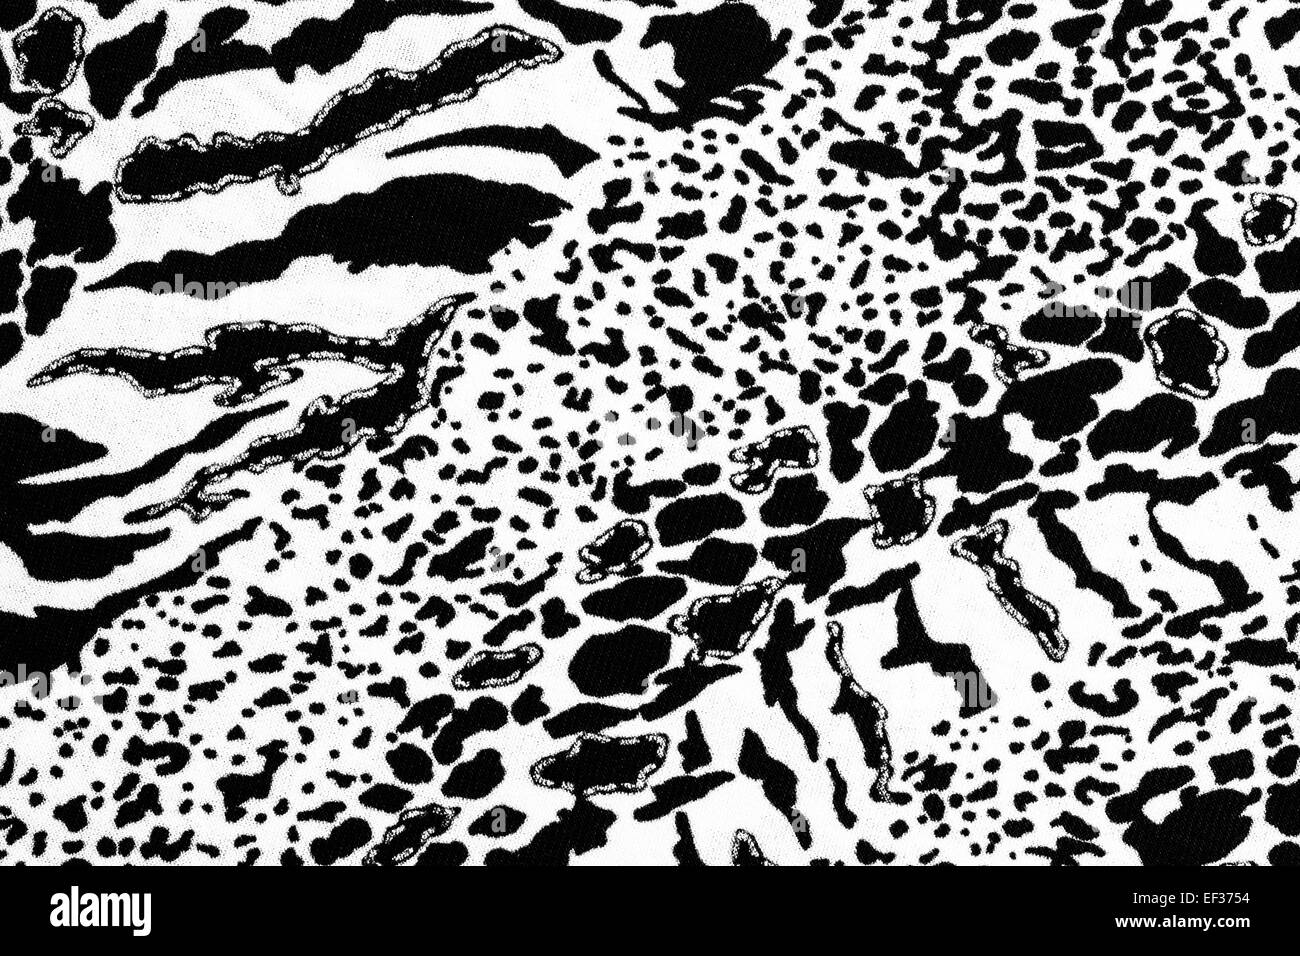 Textured variegated Black and White Stock Photos & Images - Alamy